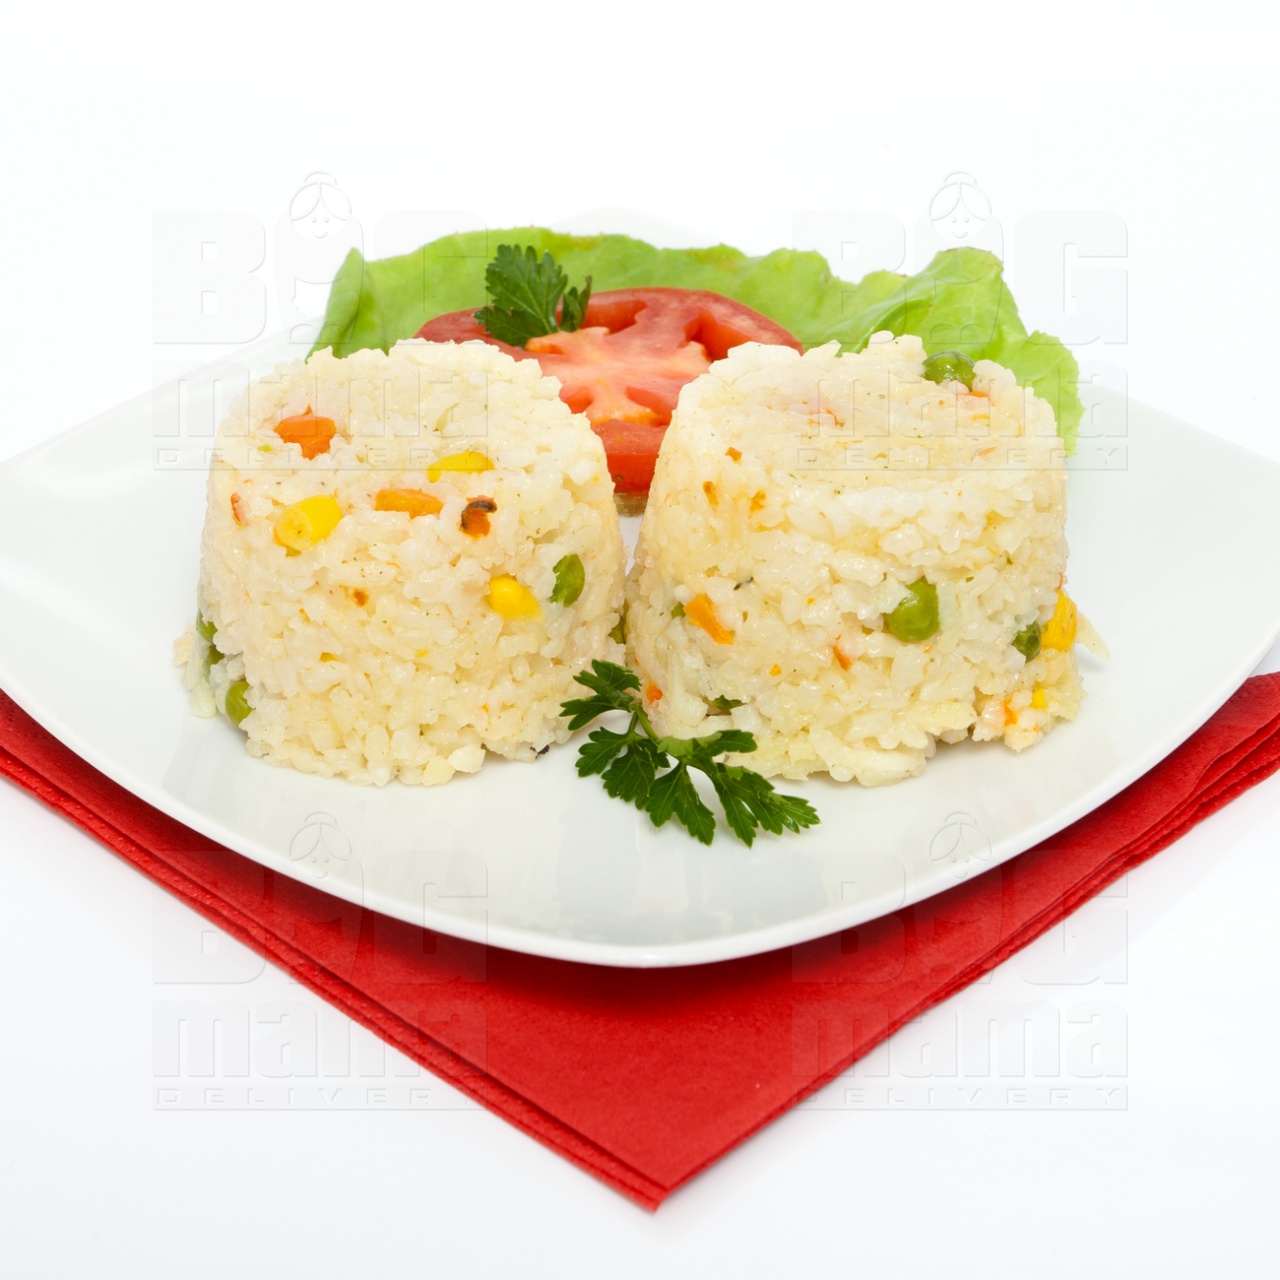 Product #184 image - Rice with vegetables, half portion